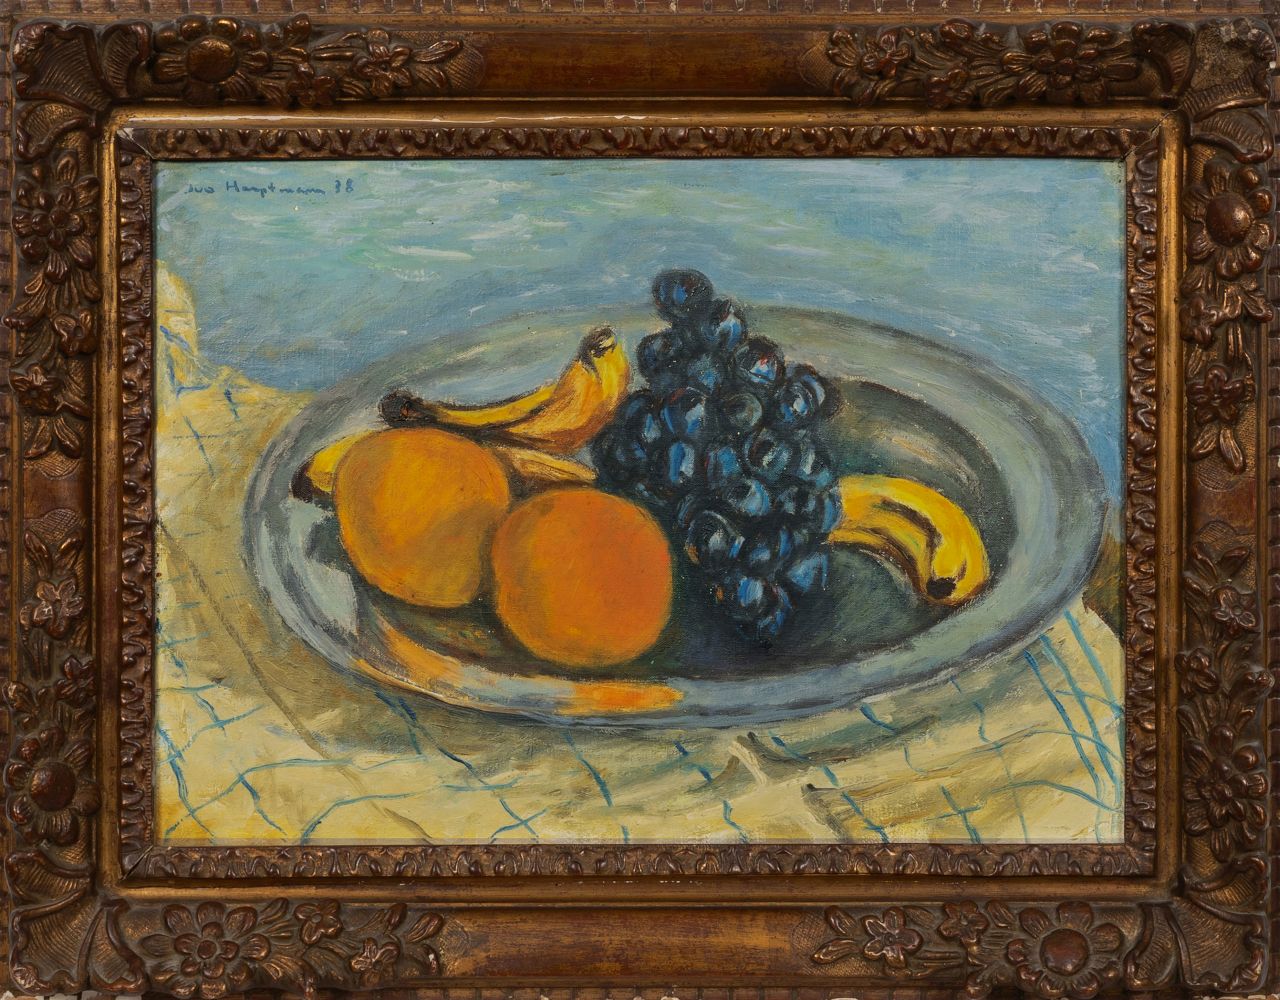 Fruits in a Bowl - image 2